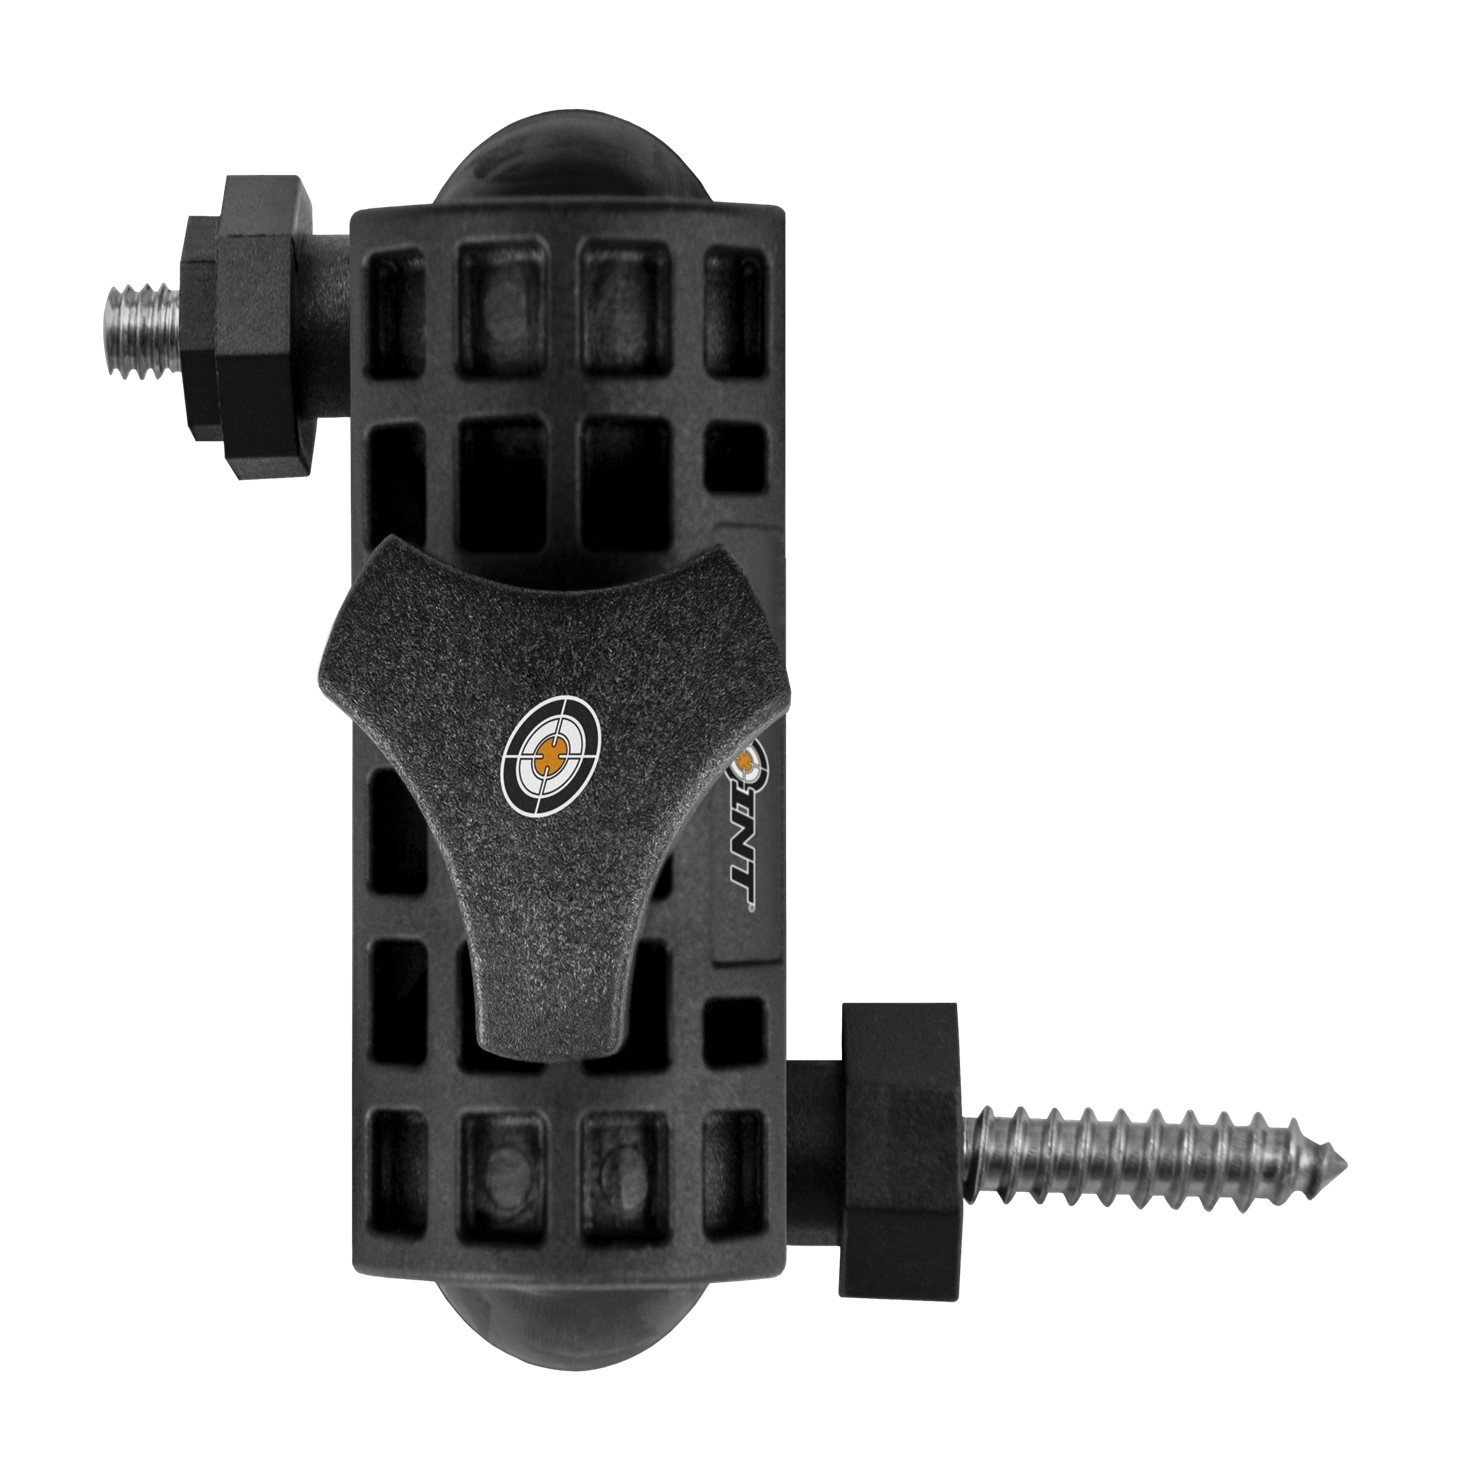 SpyPoint Adjustable Mounting Arm